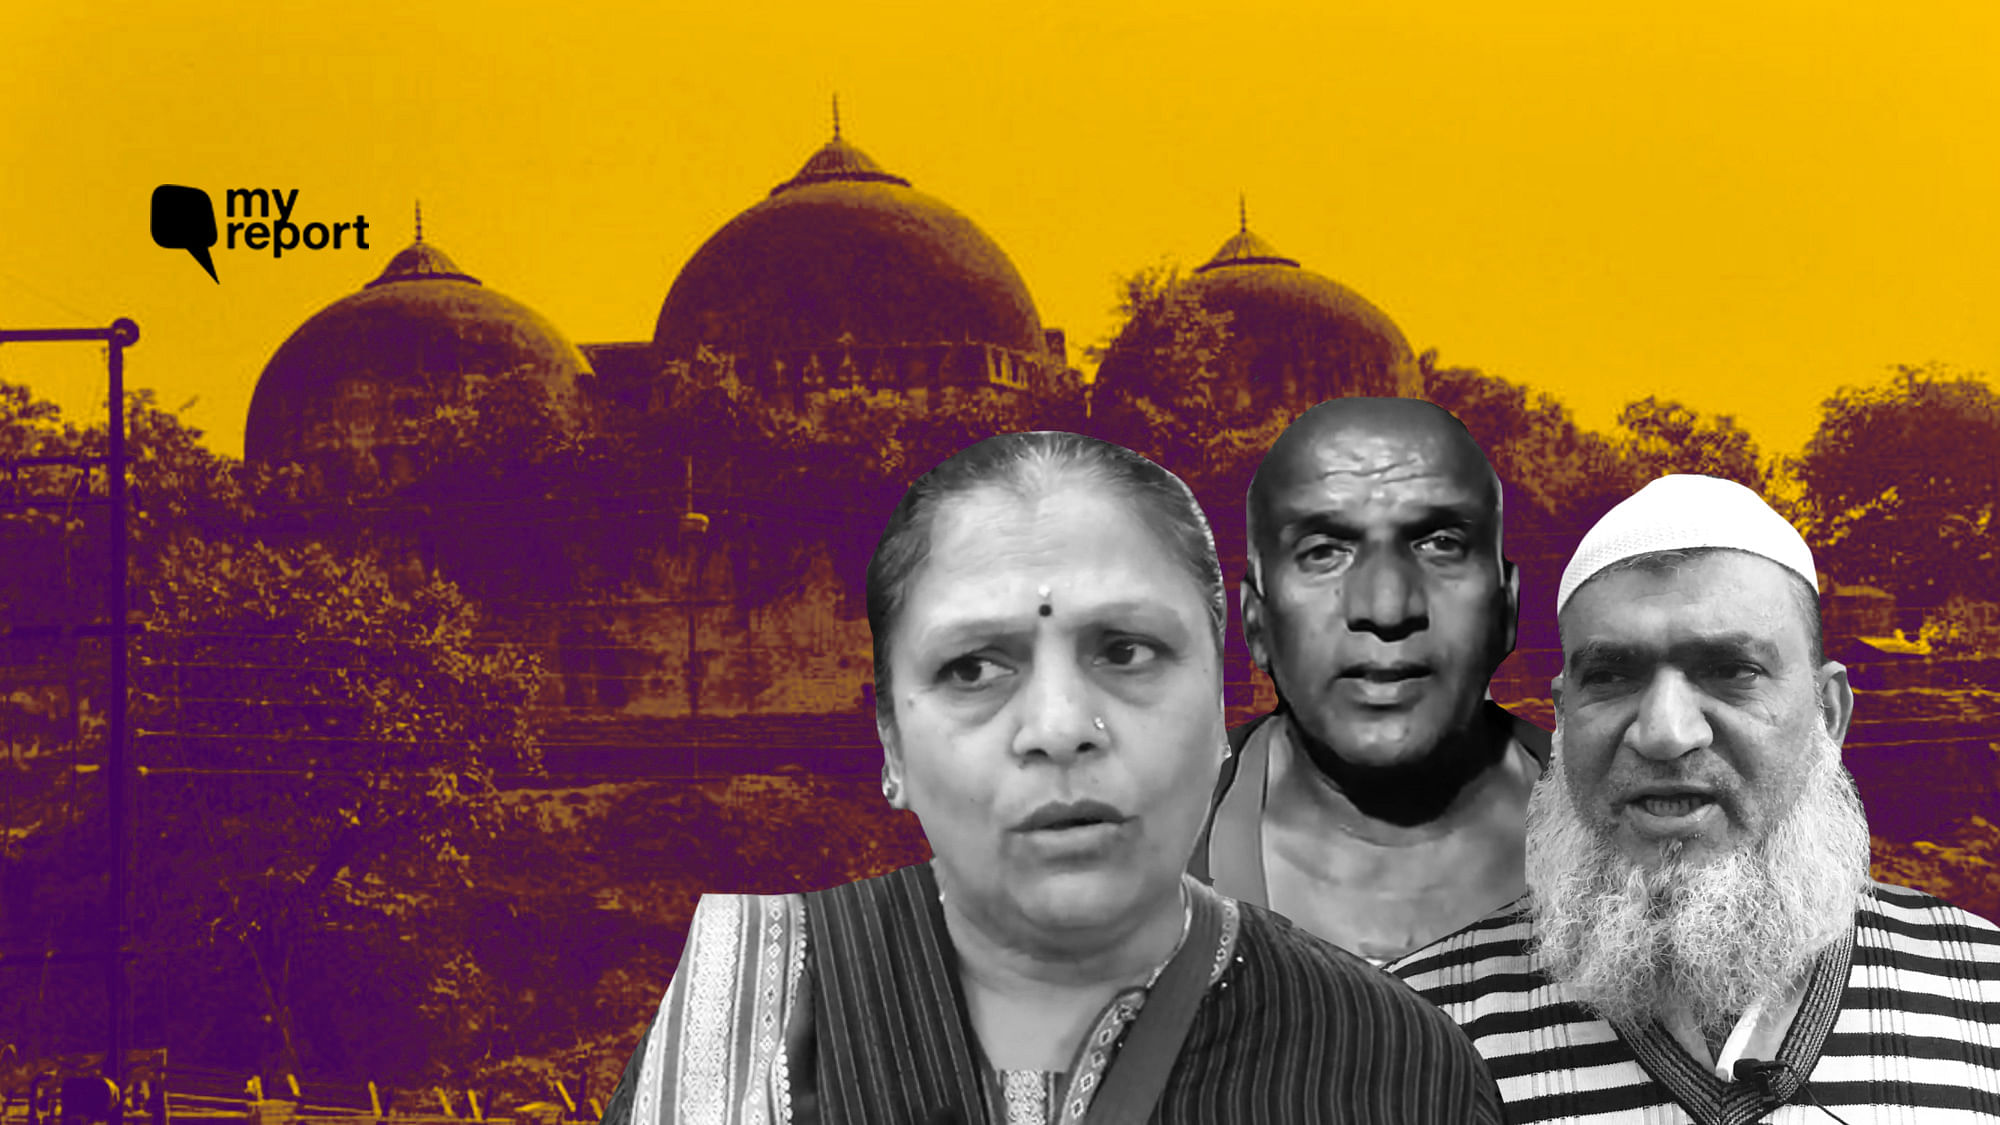 We asked citizens where they were on 6 December 1992 – the day of the Babri Masjid demolition.